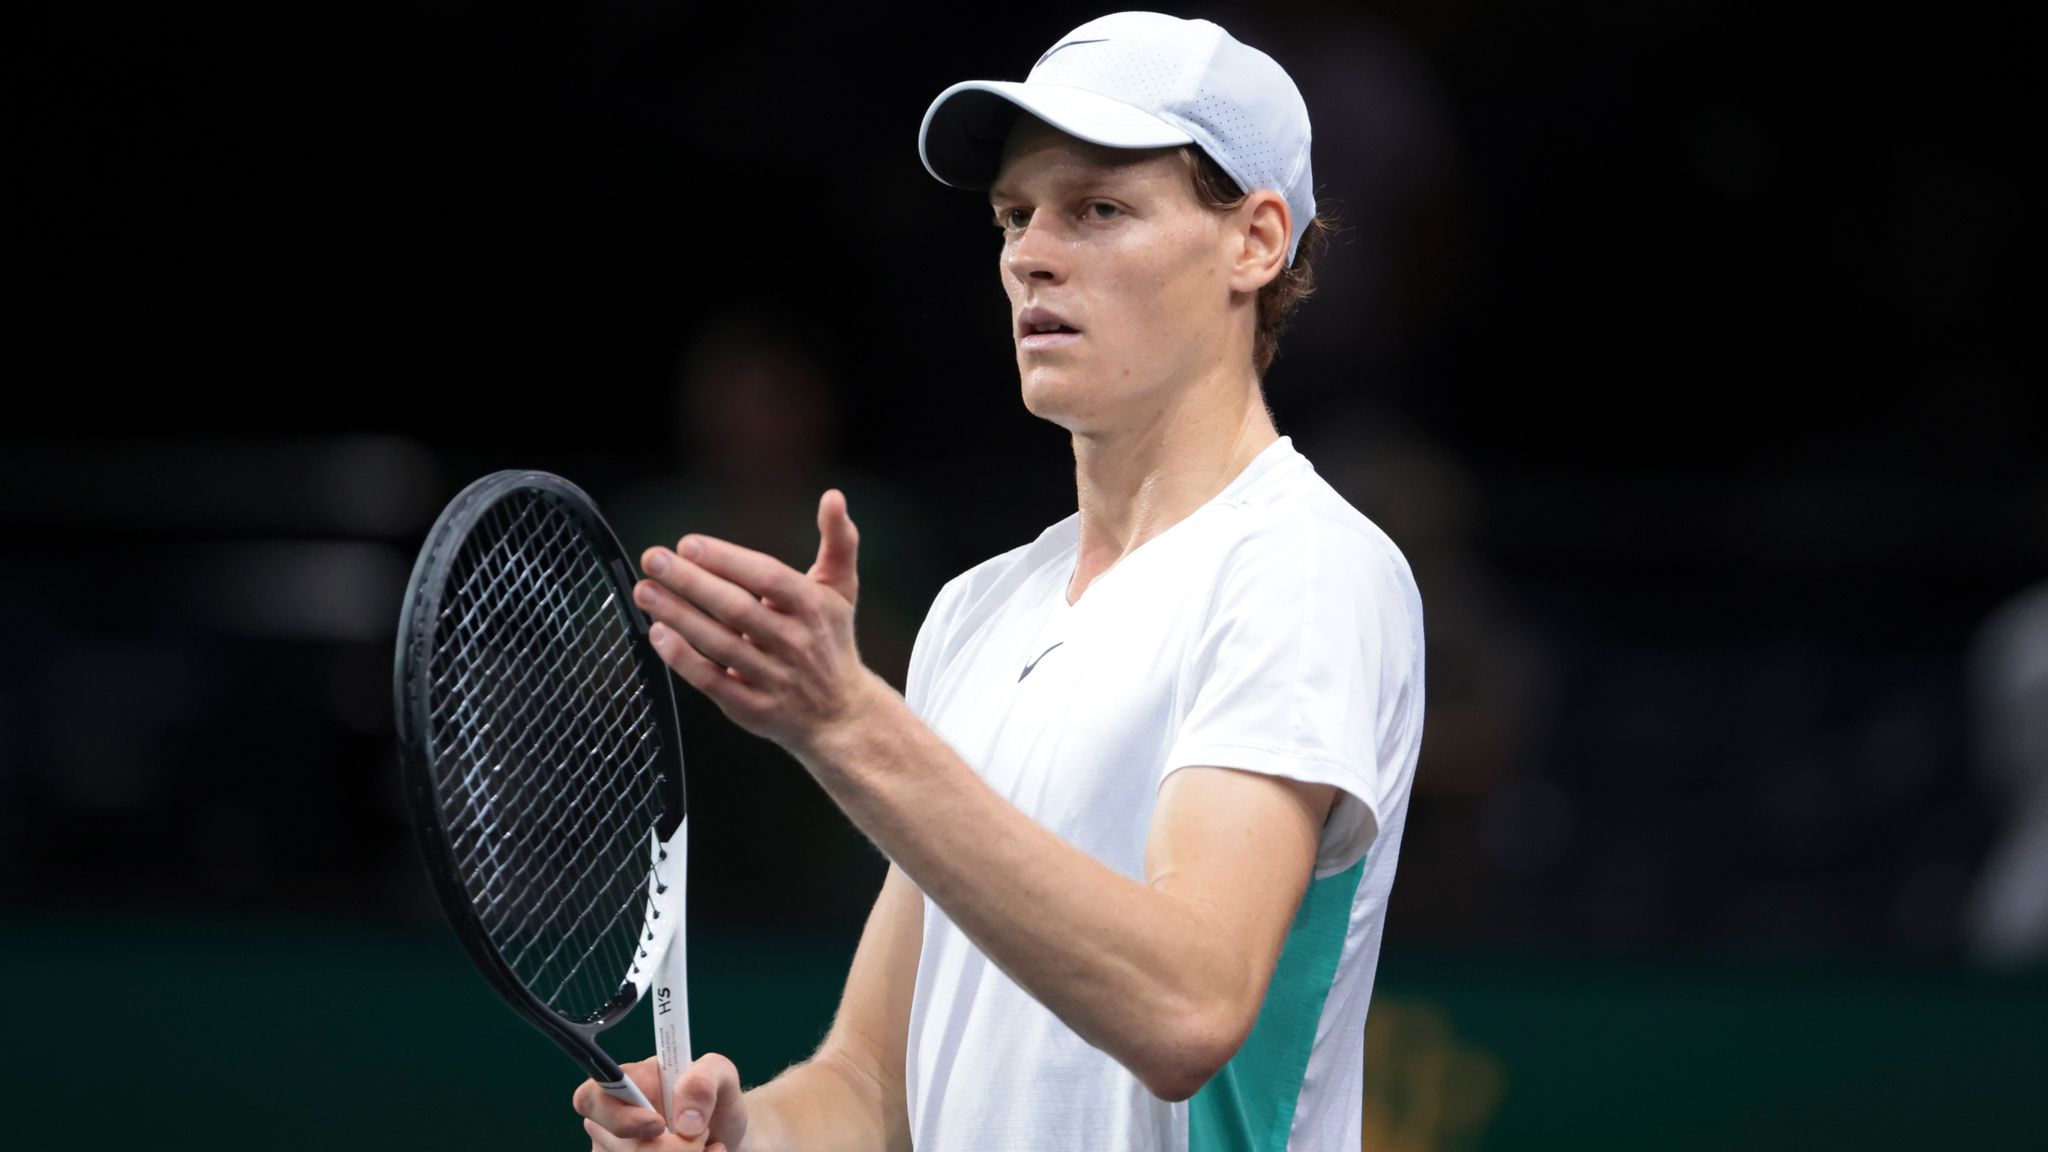 ATP Paris Masters Organisers face criticism over scheduling as Jannik Sinner withdraws after late-night finish Tennis News Sky Sports